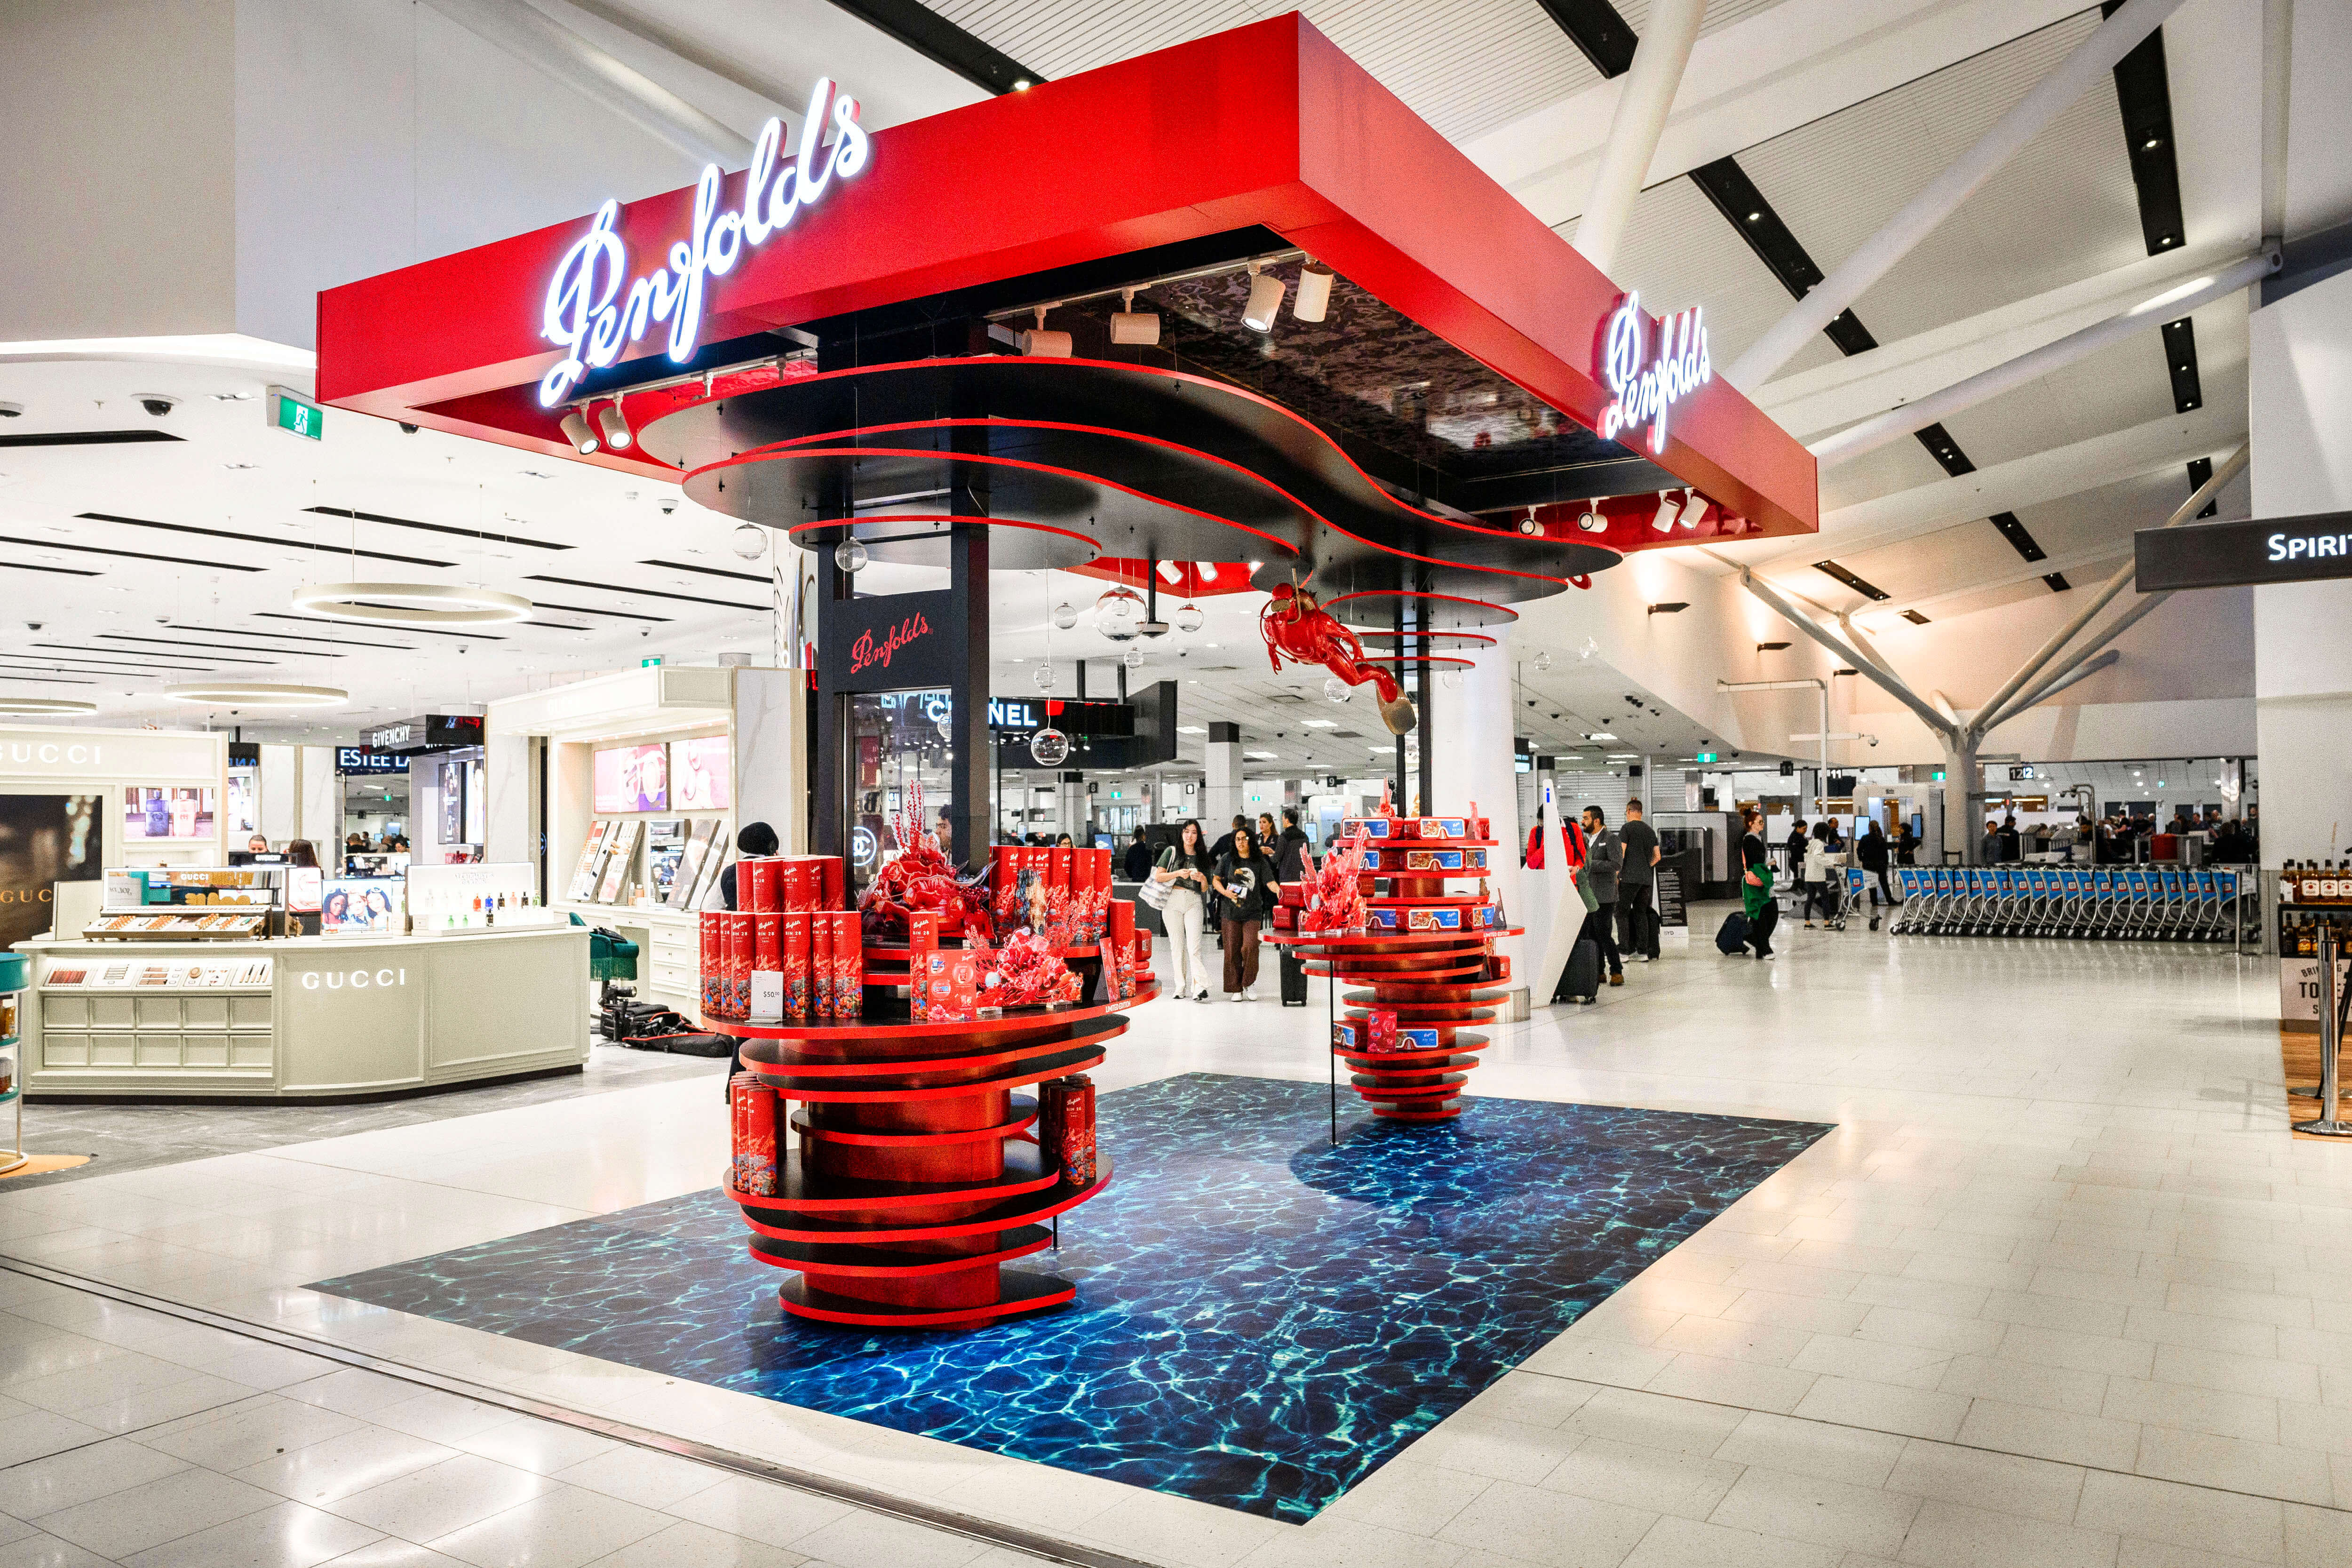 Penfolds launches Bin 389 travel retail gift pack